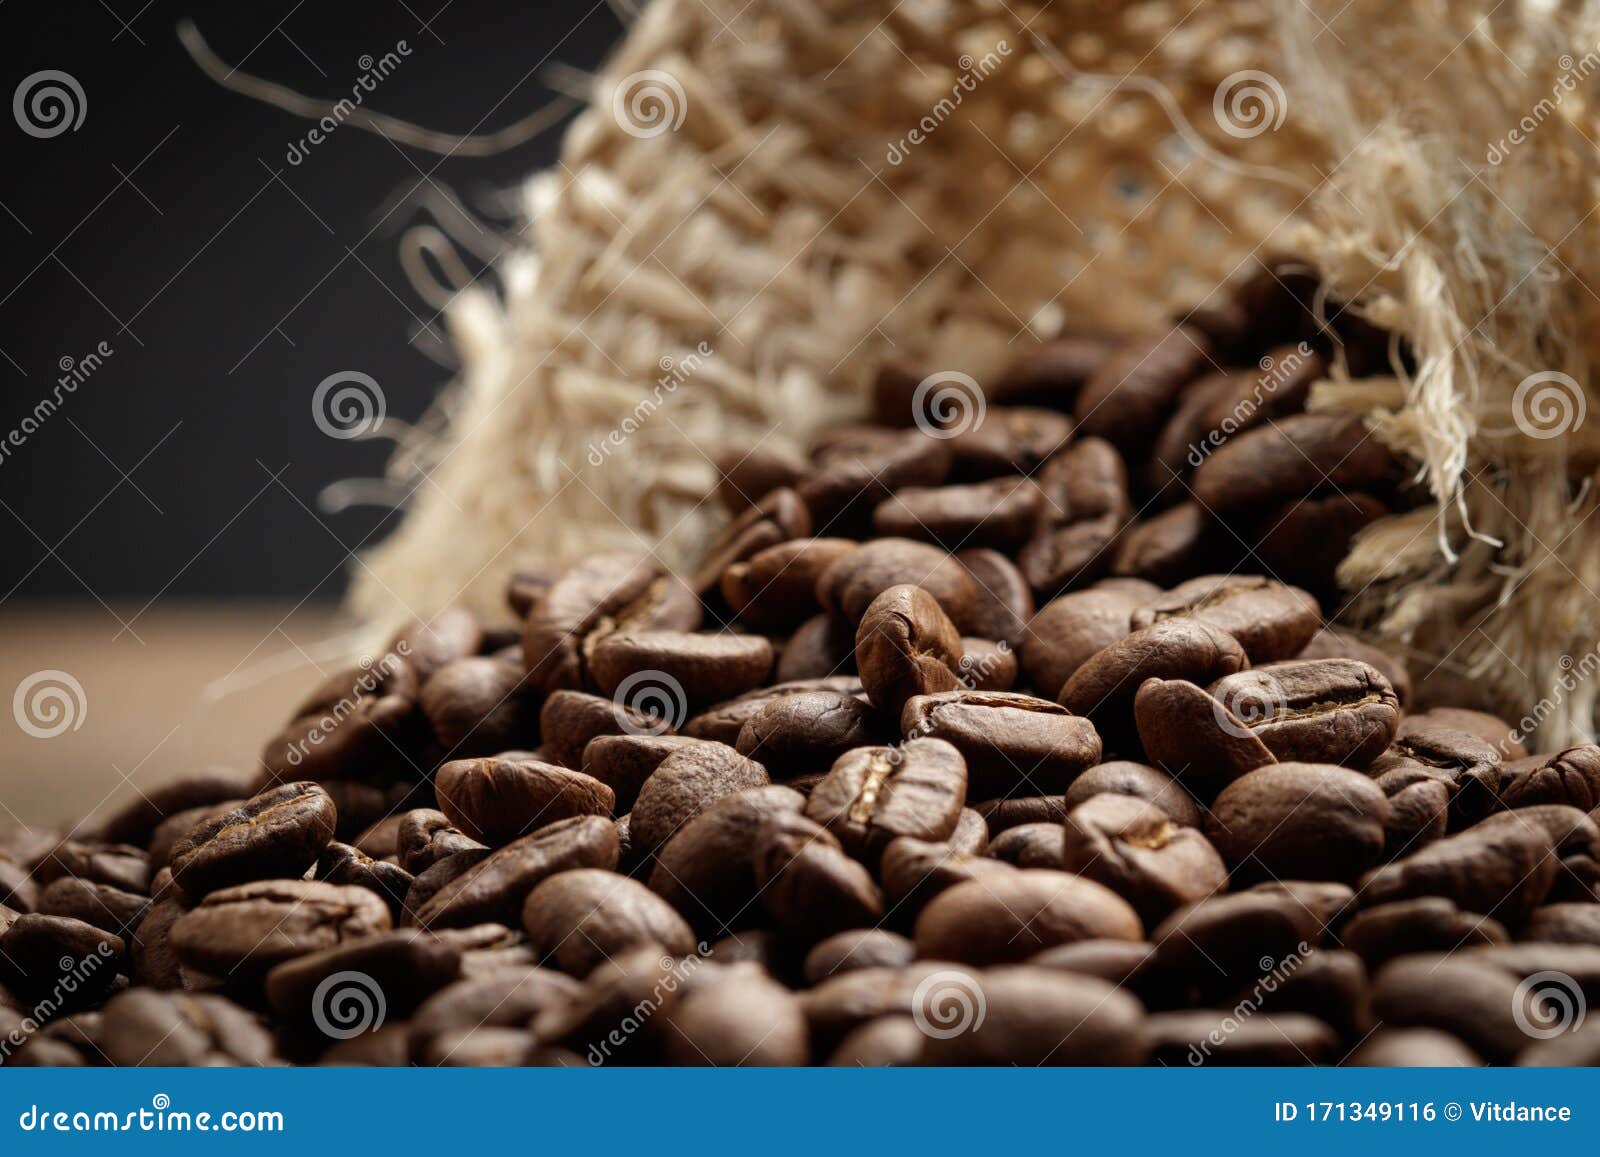 Small Bags of Coffee Beans 